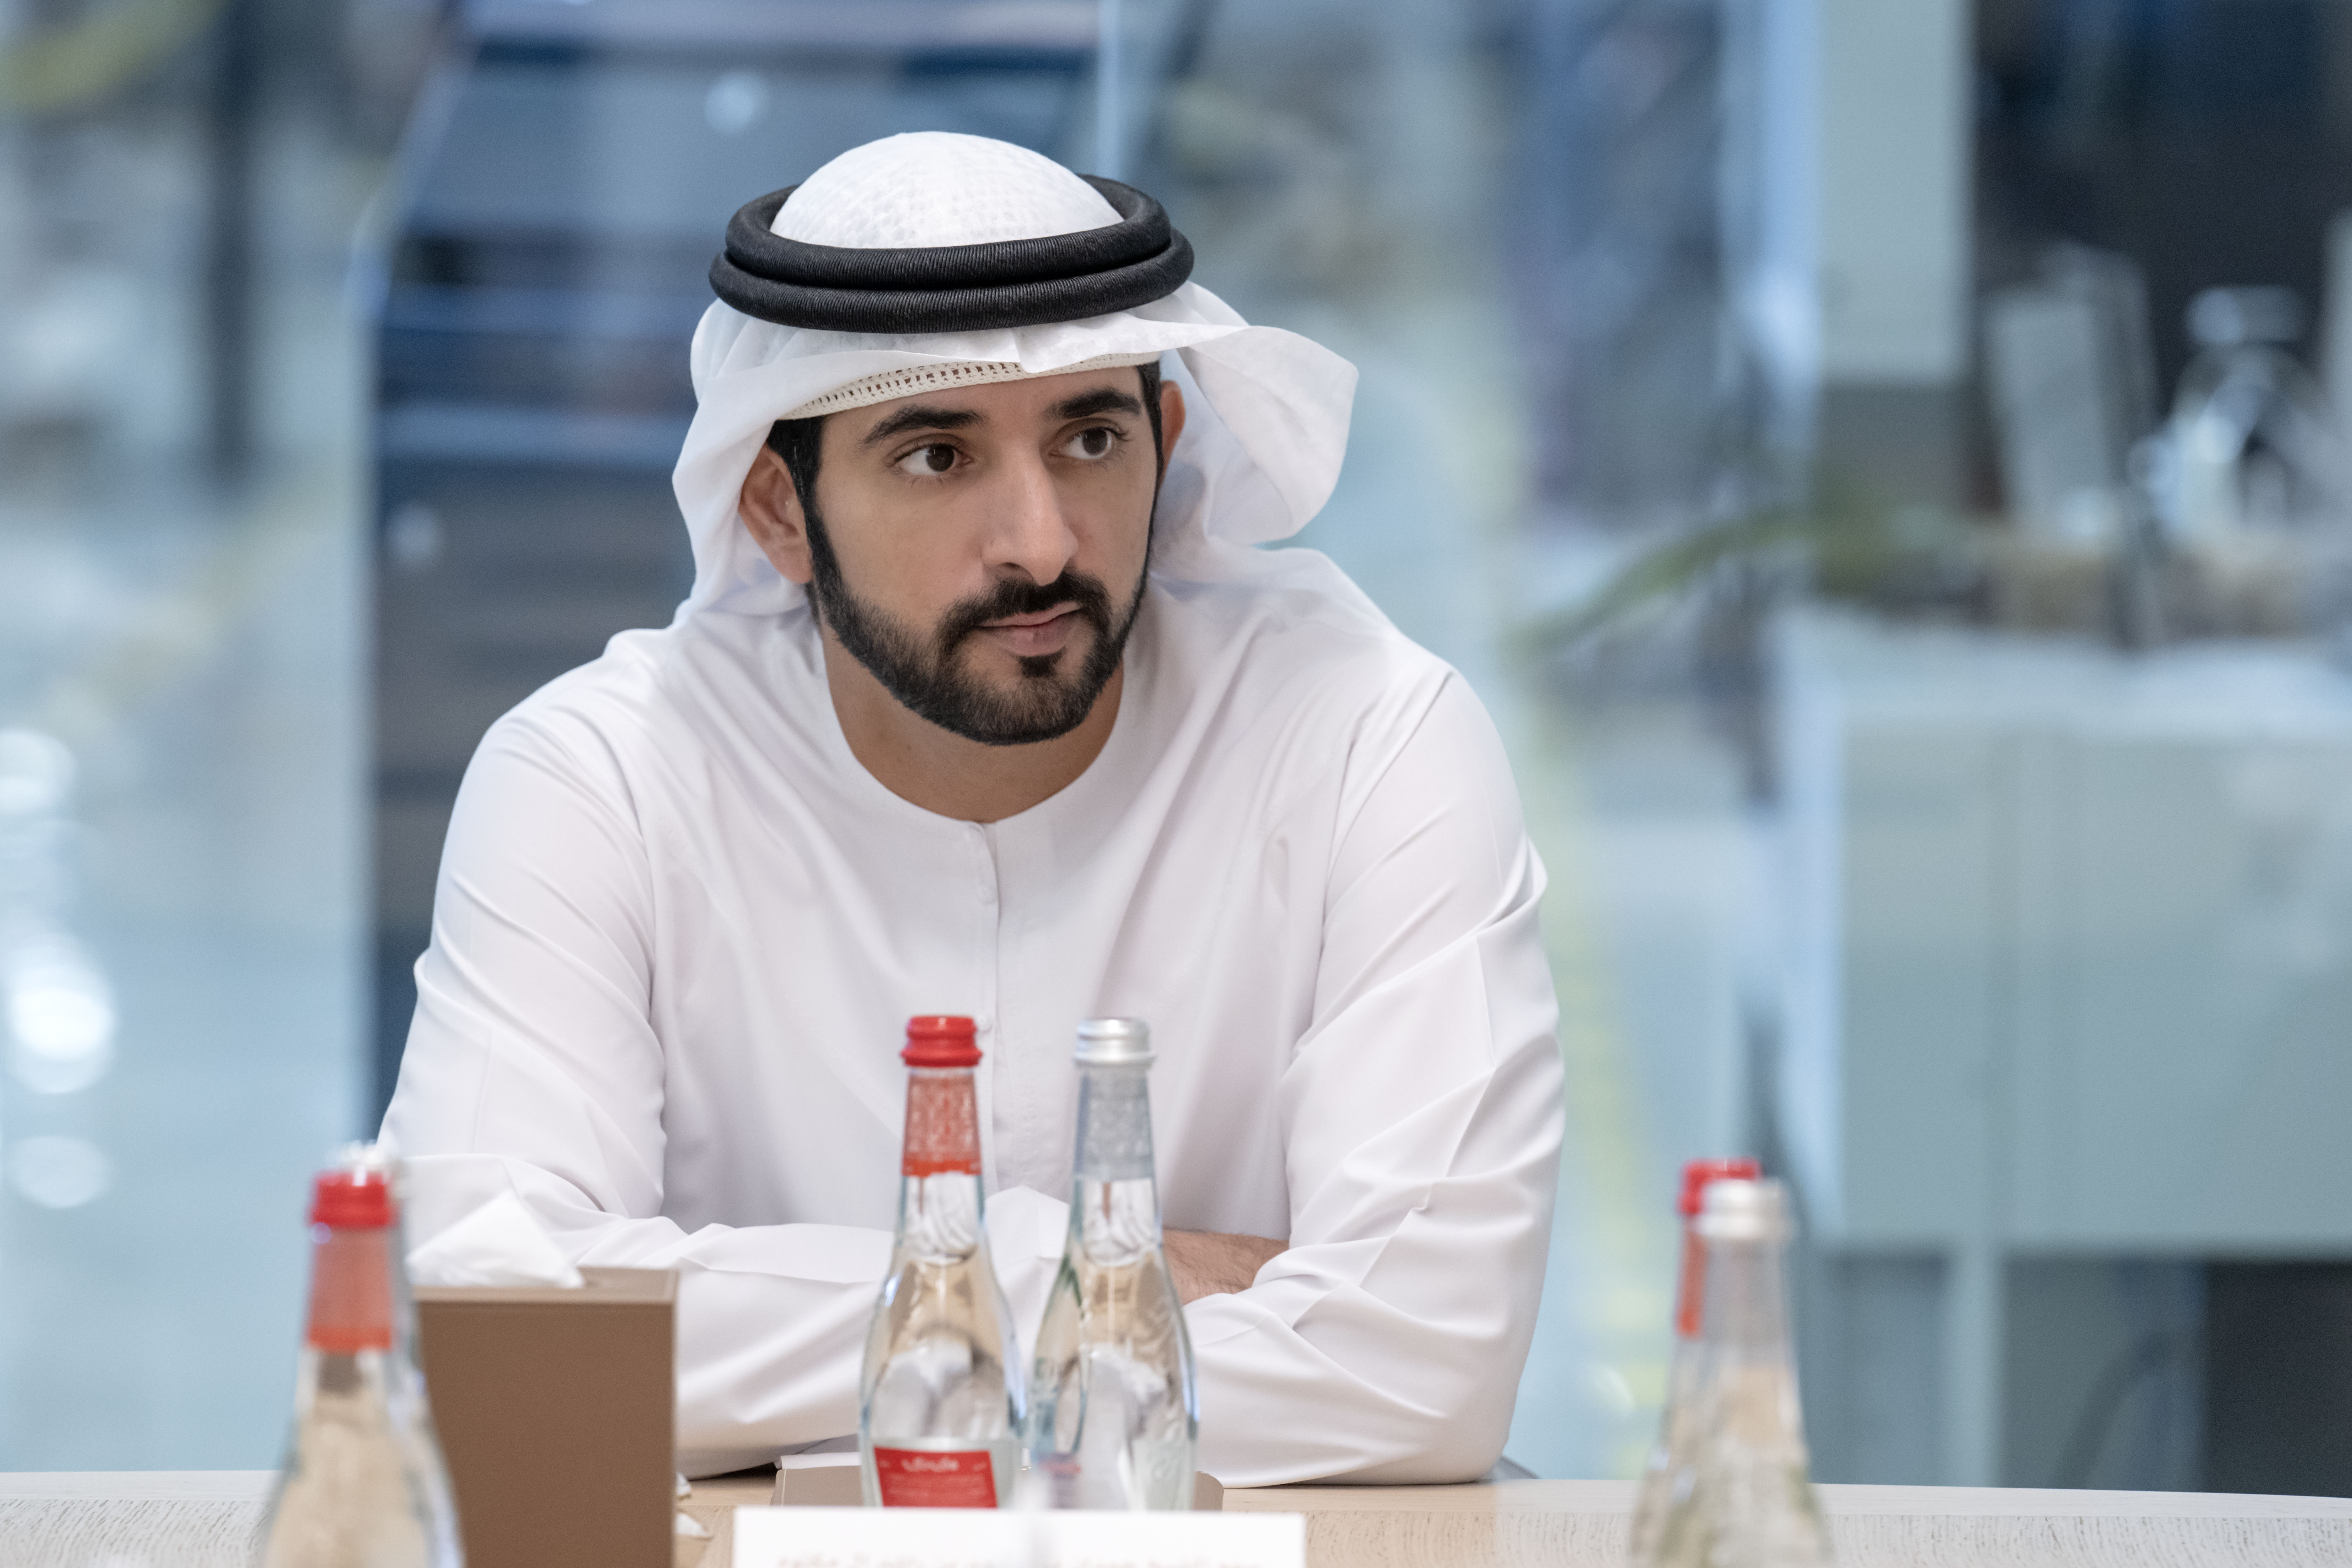 Hamdan bin Mohammed launches ‘Dubai International Growth Initiative’ allocating AED500 million to accelerate global expansion of SMEs